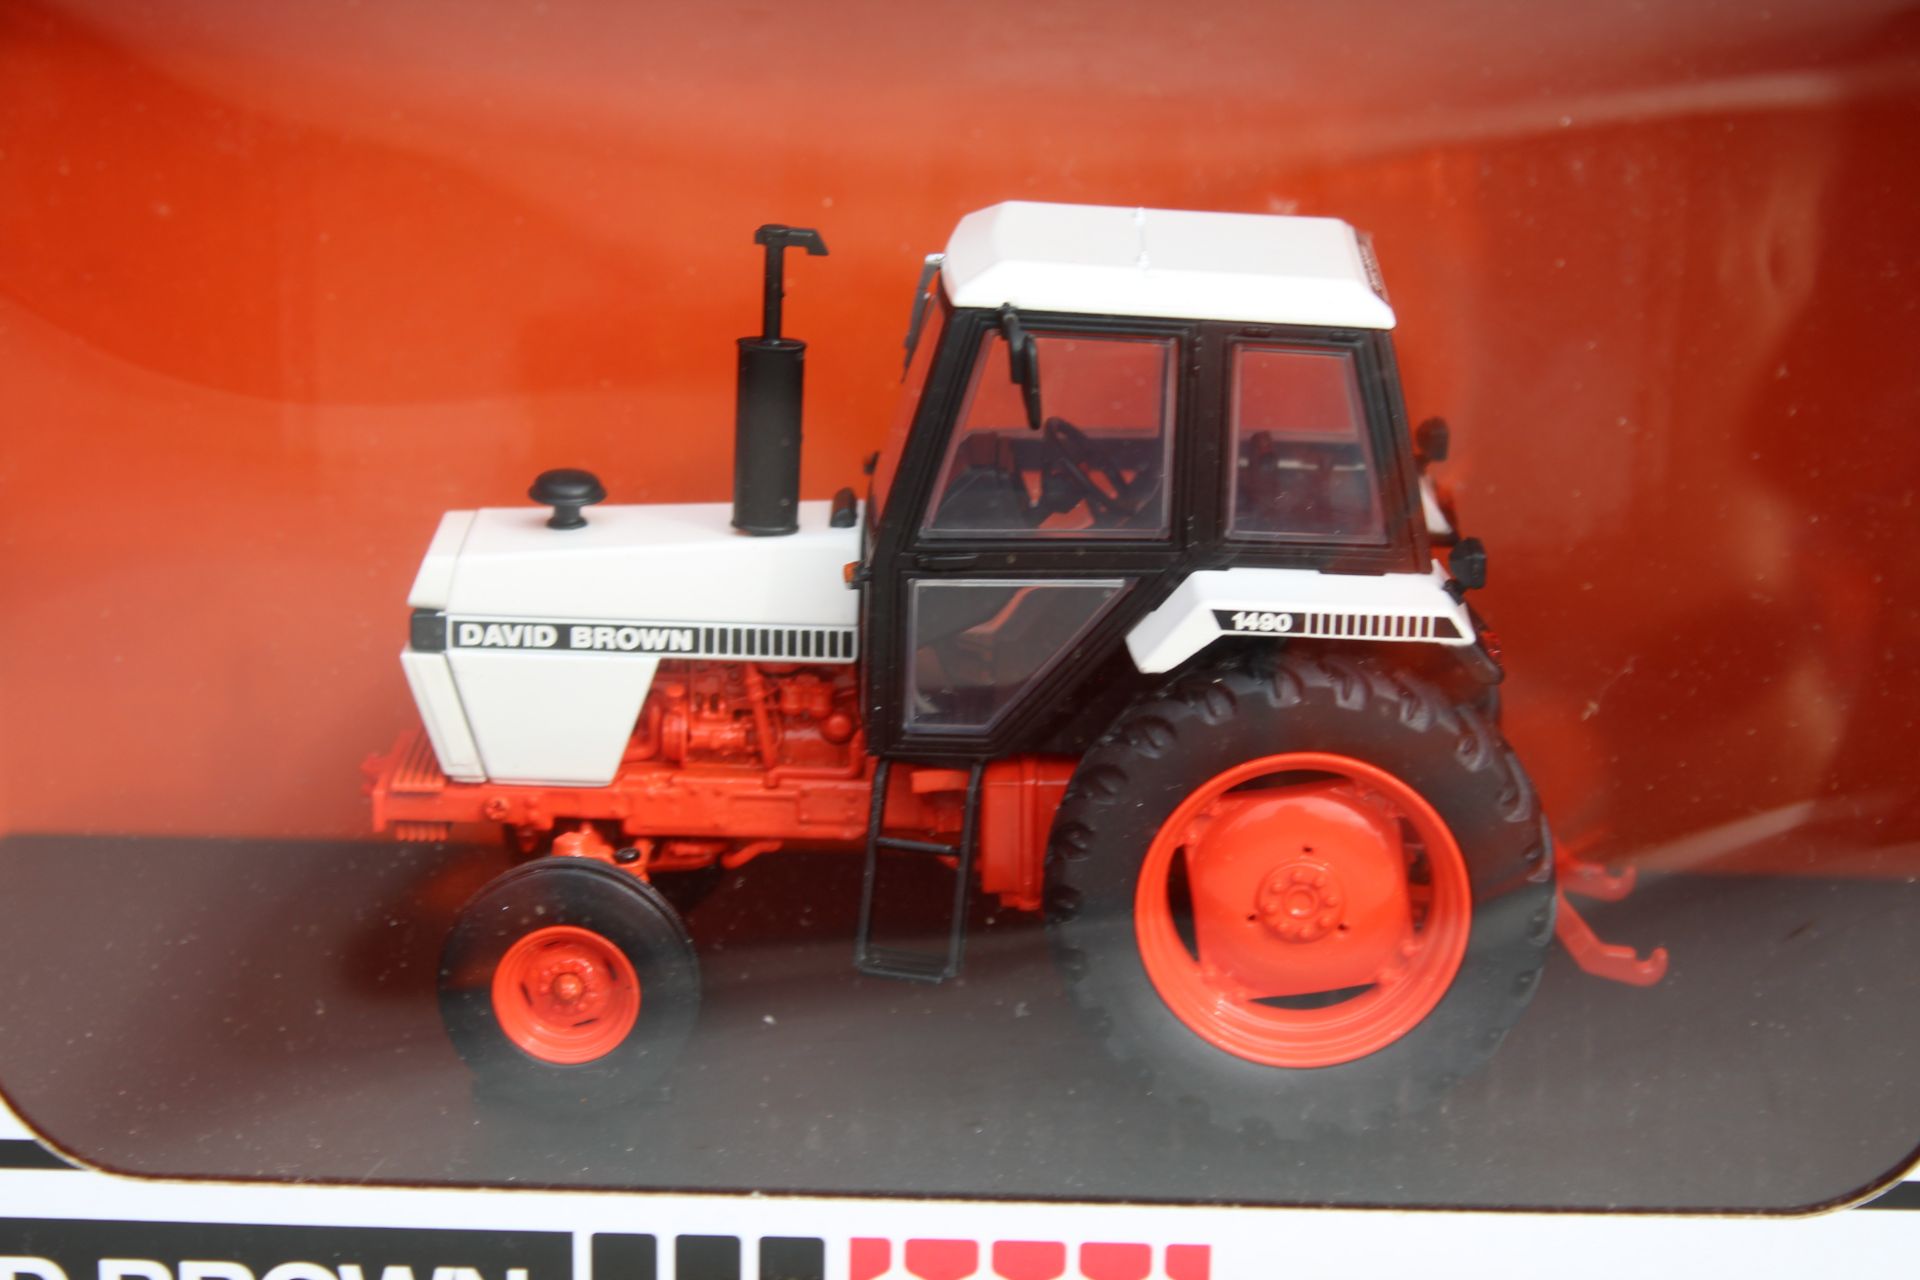 UH David Brown 1490 2wd Tractor 1/32. V - Image 2 of 2